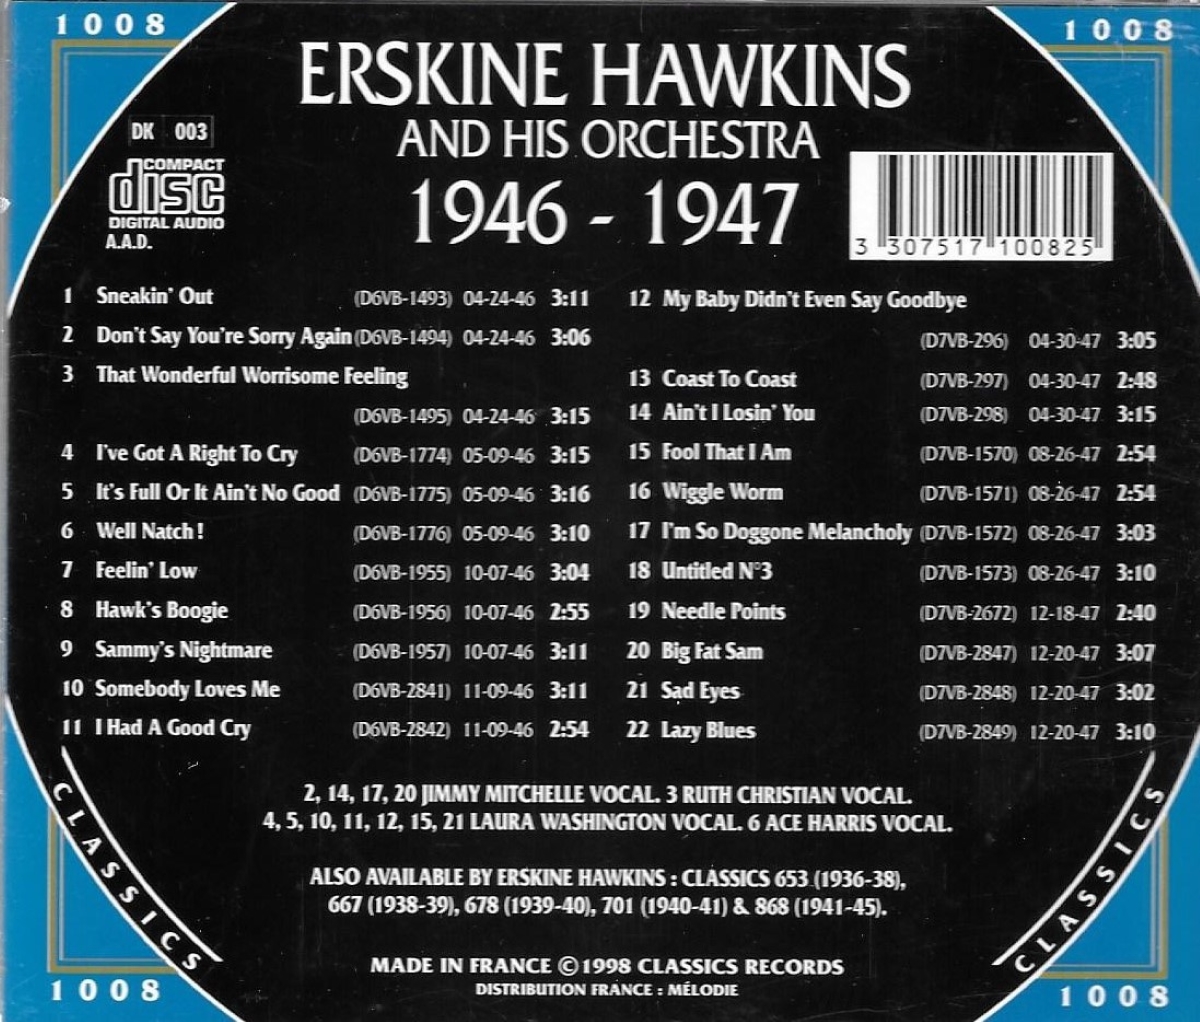 The Chronological Erskine Hawkins and His Orchestra-1946-1947